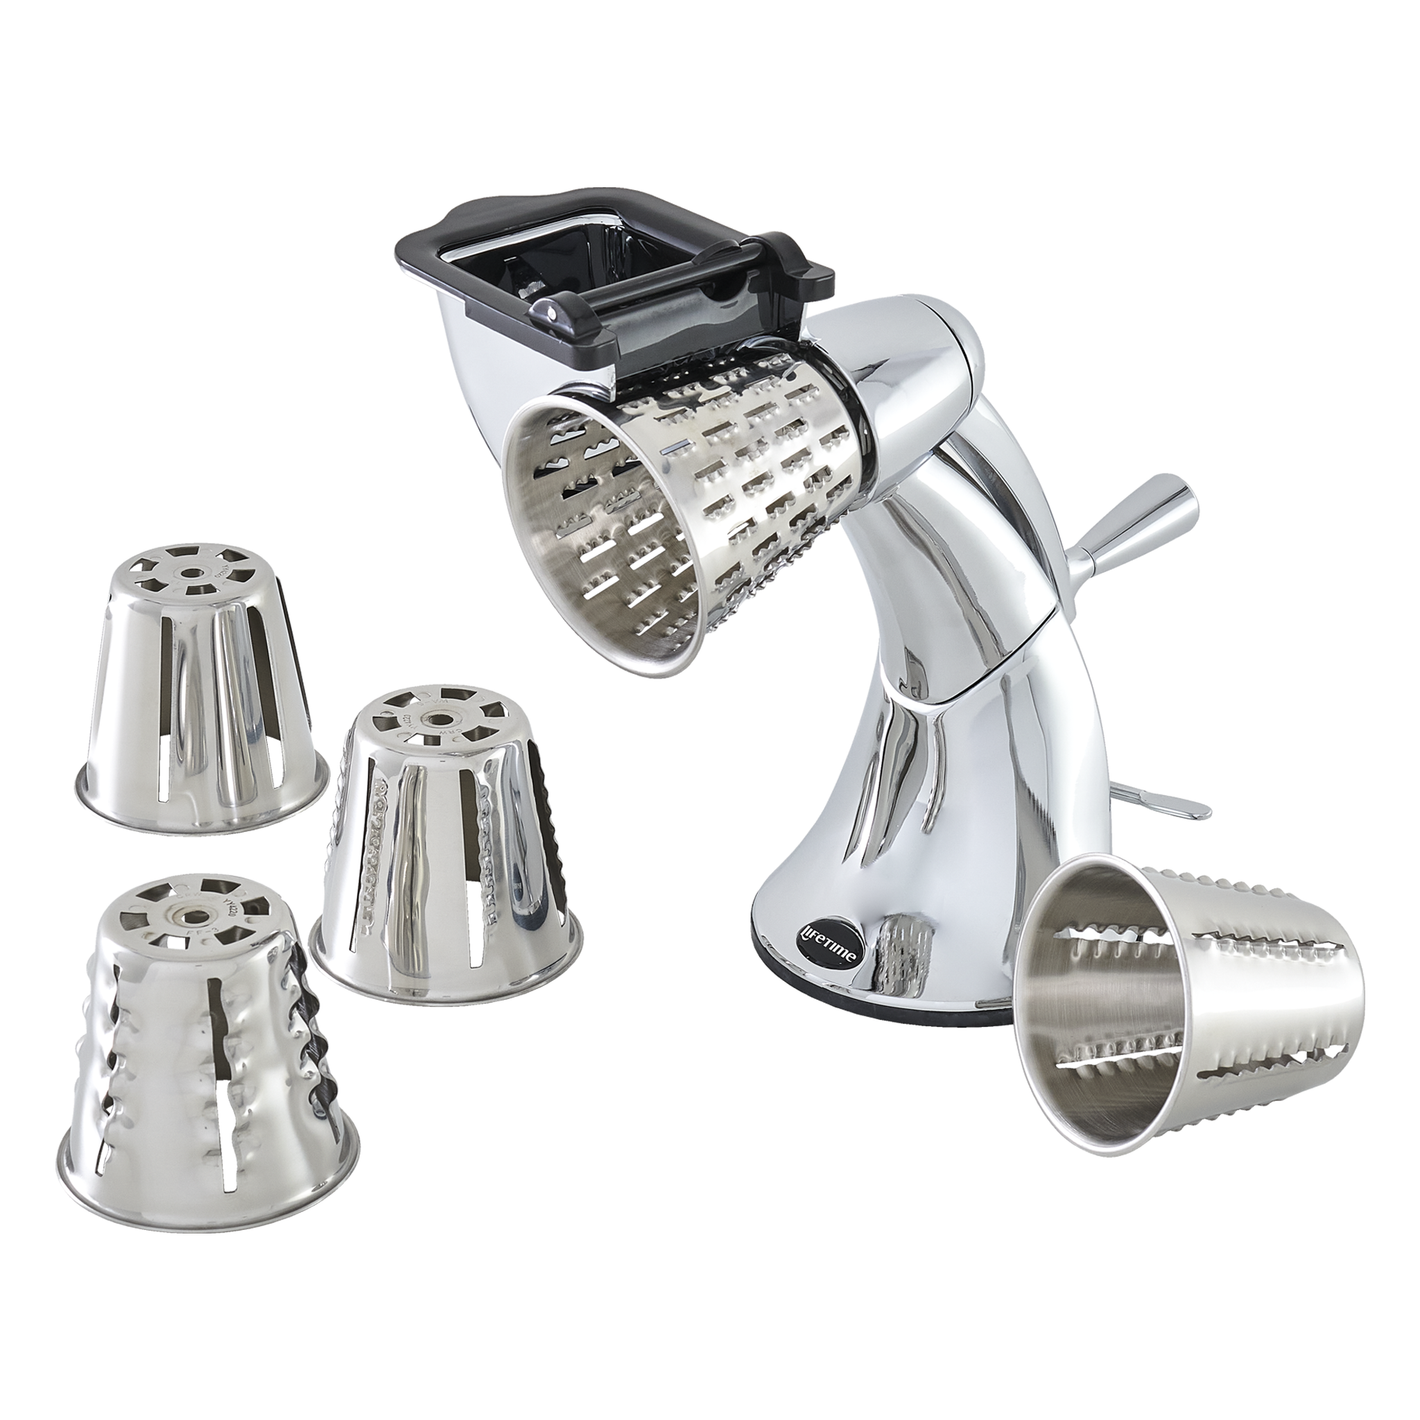 Lifetime Cookware Cutter and Accessories 